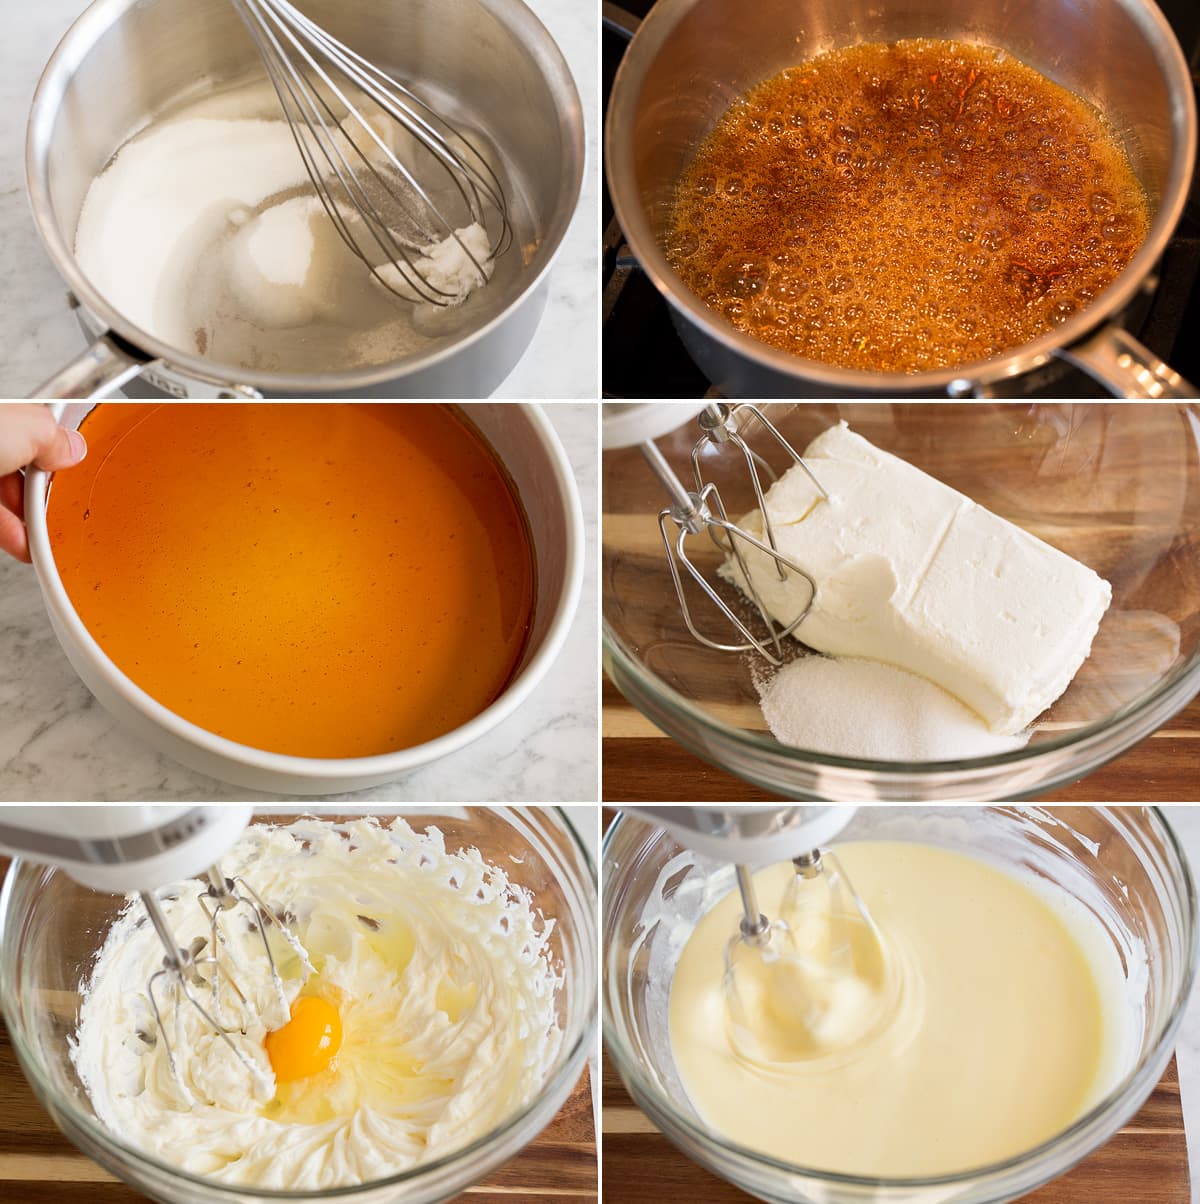 Collage of six images showing steps to making flan caramel in a saucepan, pouring to cake pan, and beginning to make flan filling in a glass bowl.